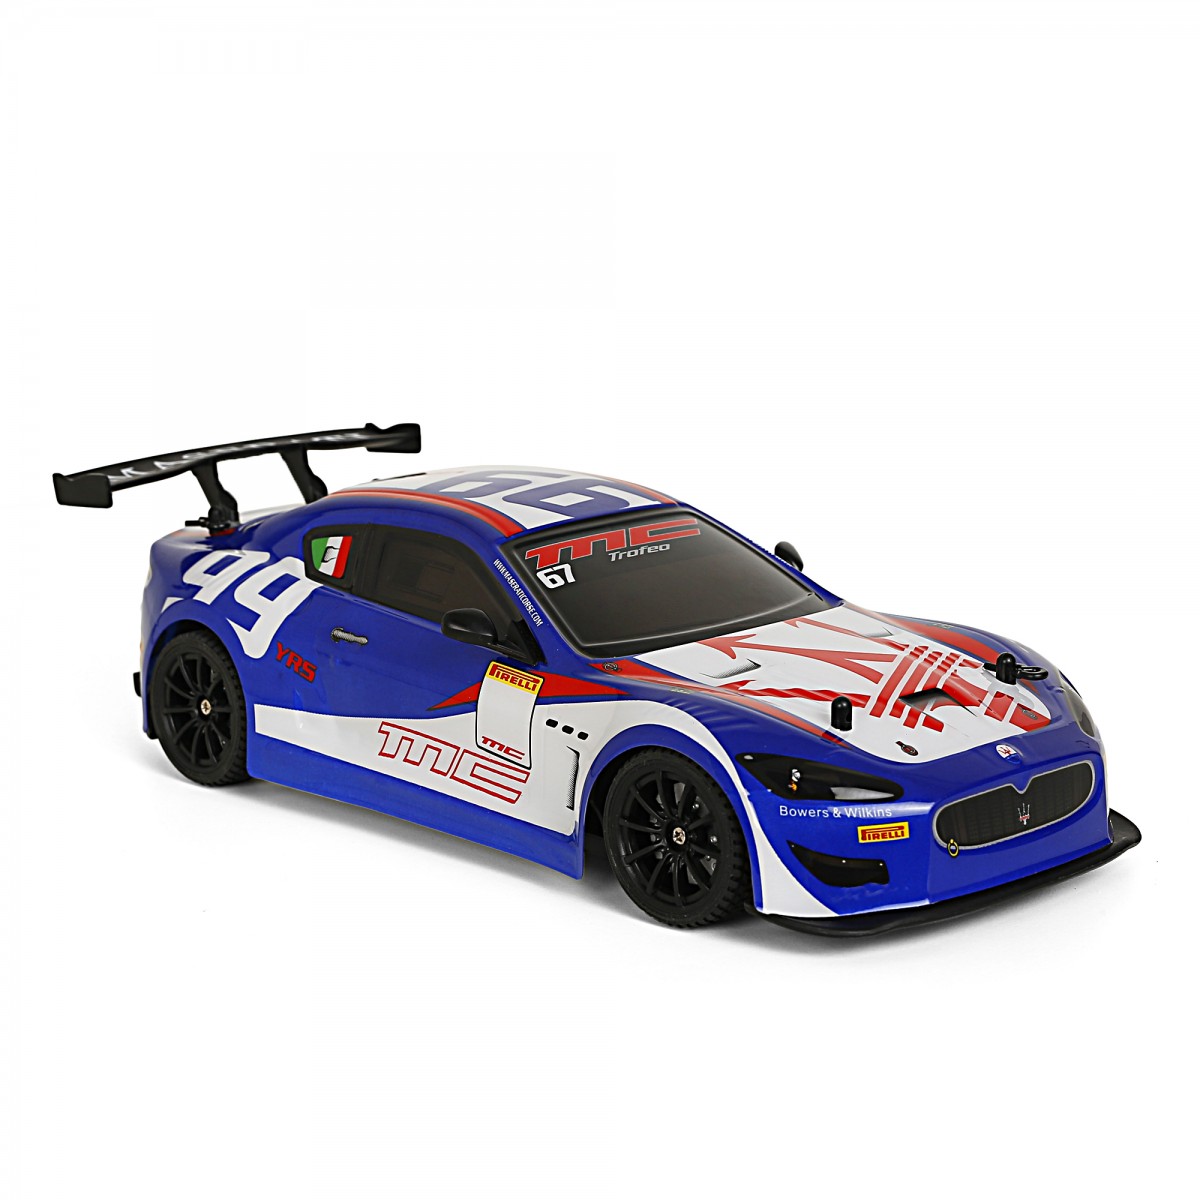 Ralleyz RC Remote Control Maserati Car, Four Wheeler, Remote Control Rock Climber High Speed Monster Racing Car, Kids for 6Y+, Multicolour